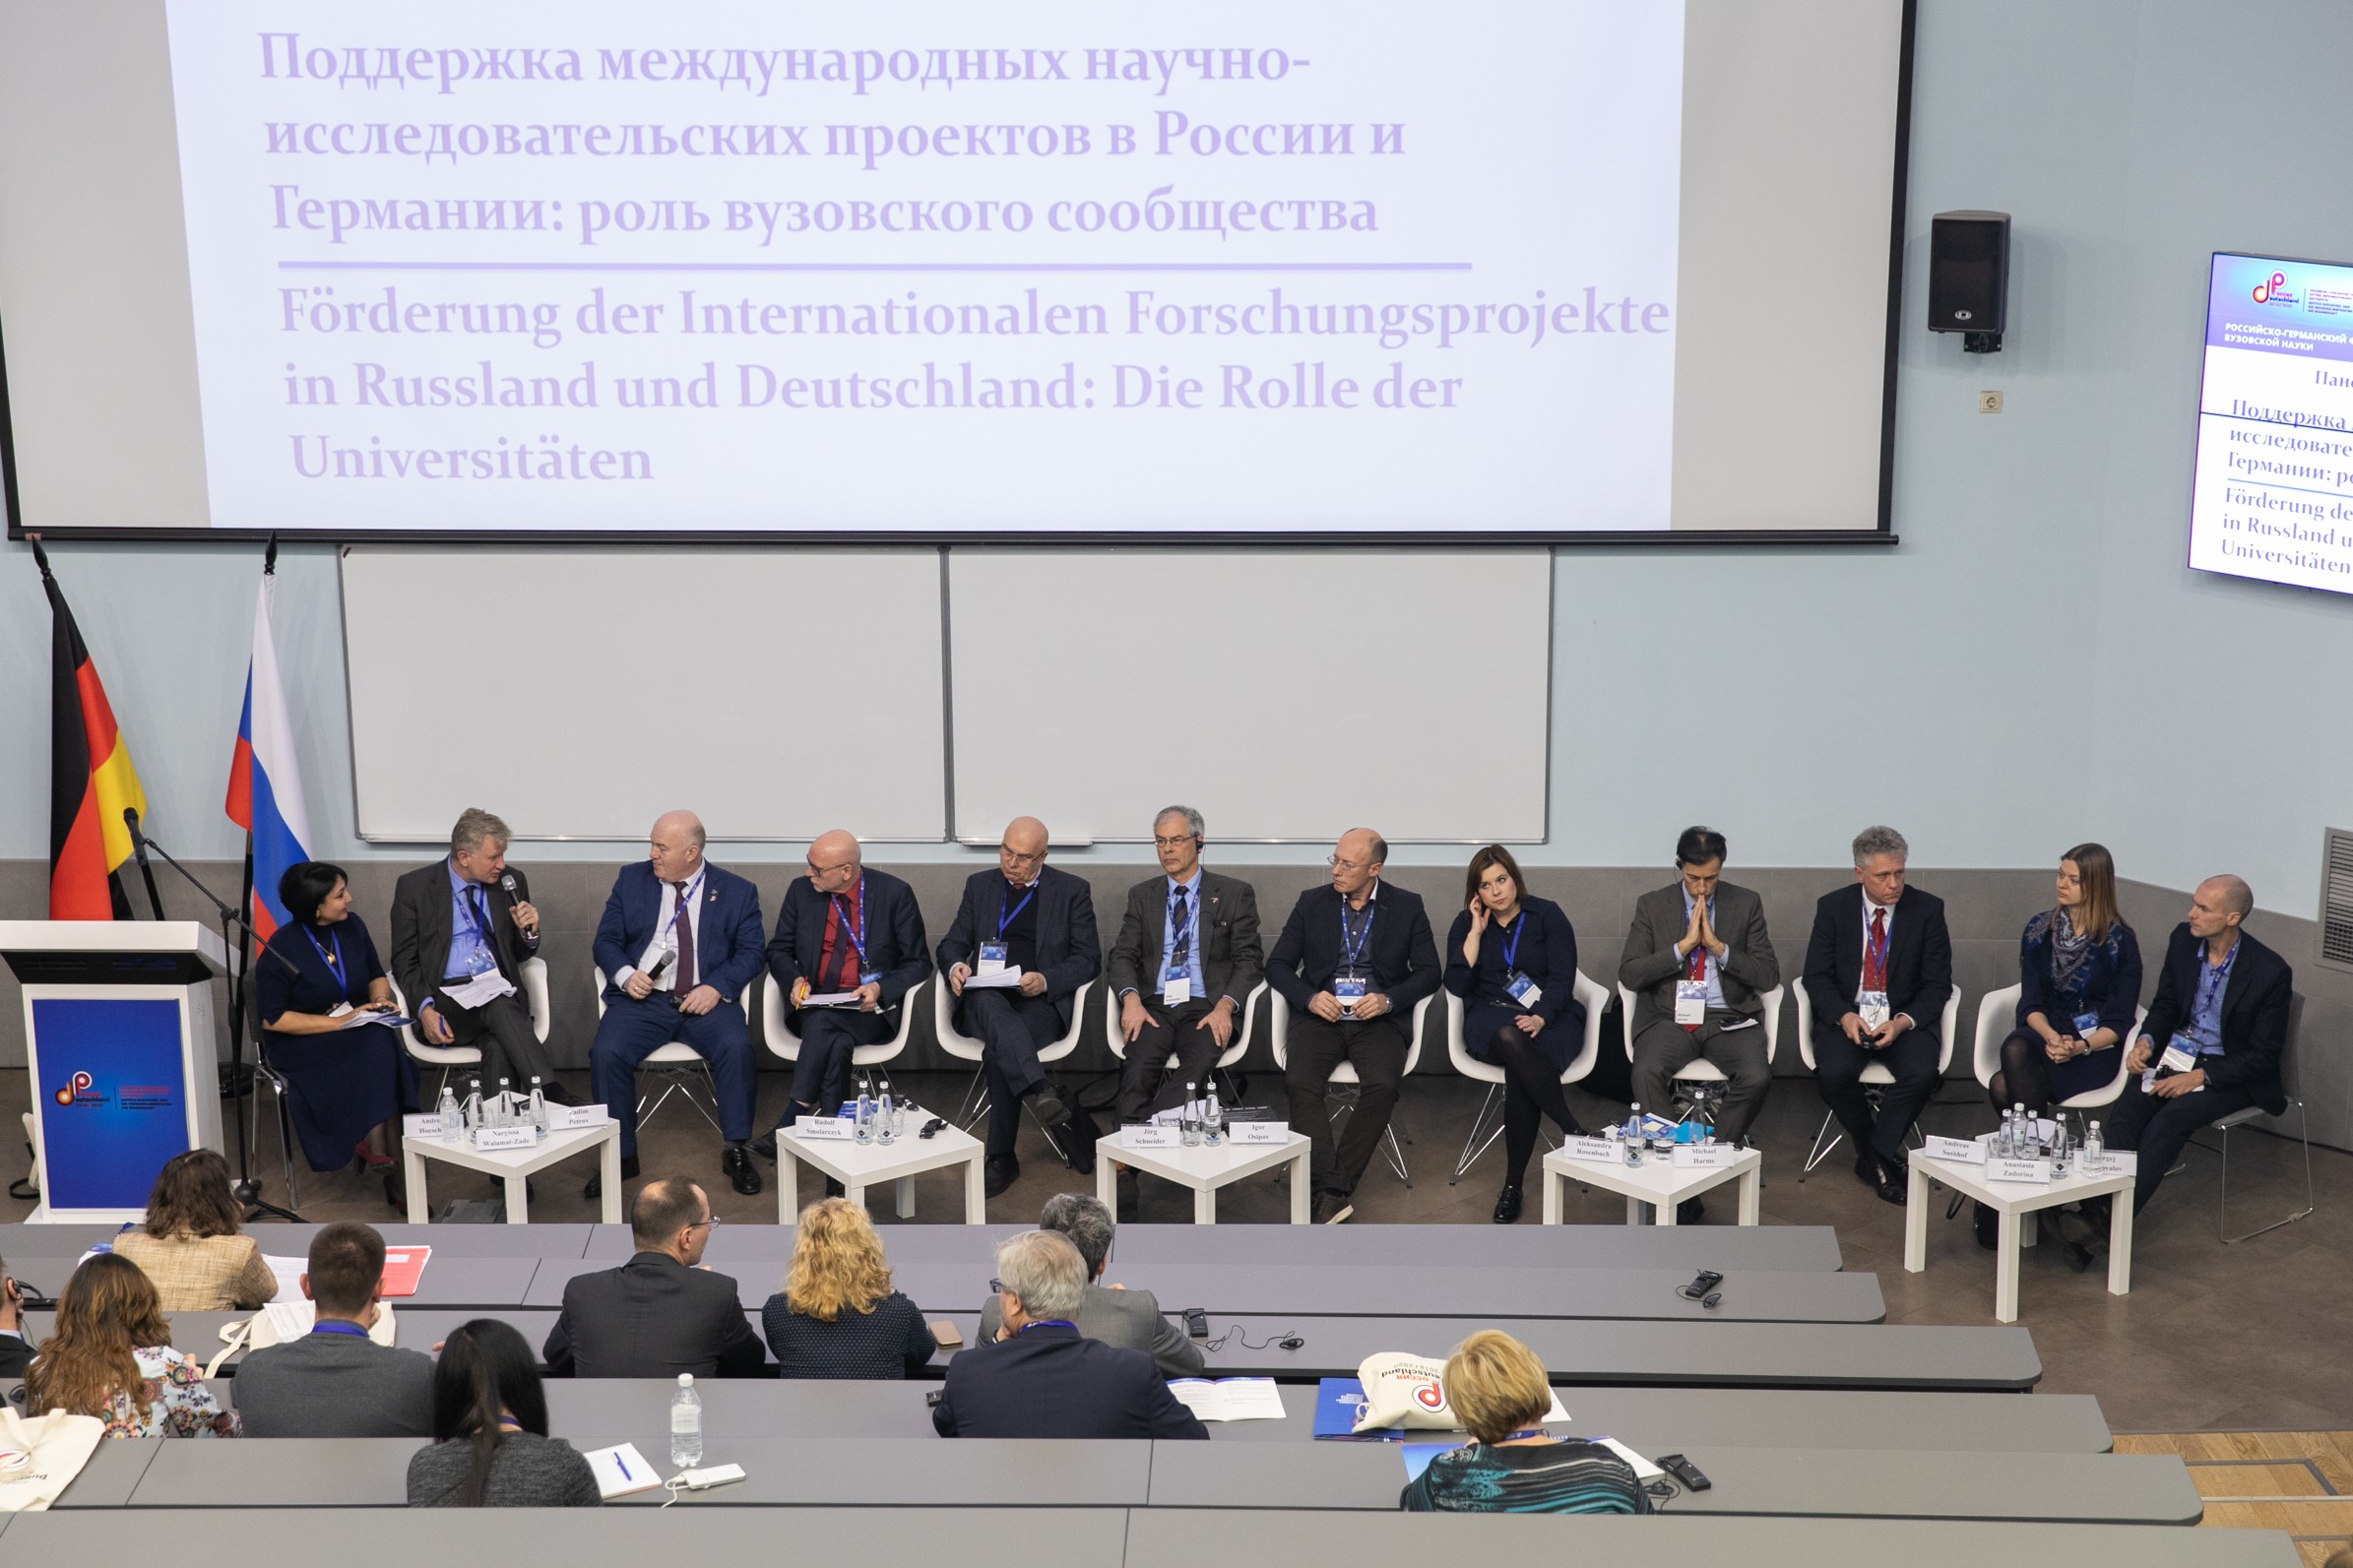 Panel discussion on German-Russian research funding